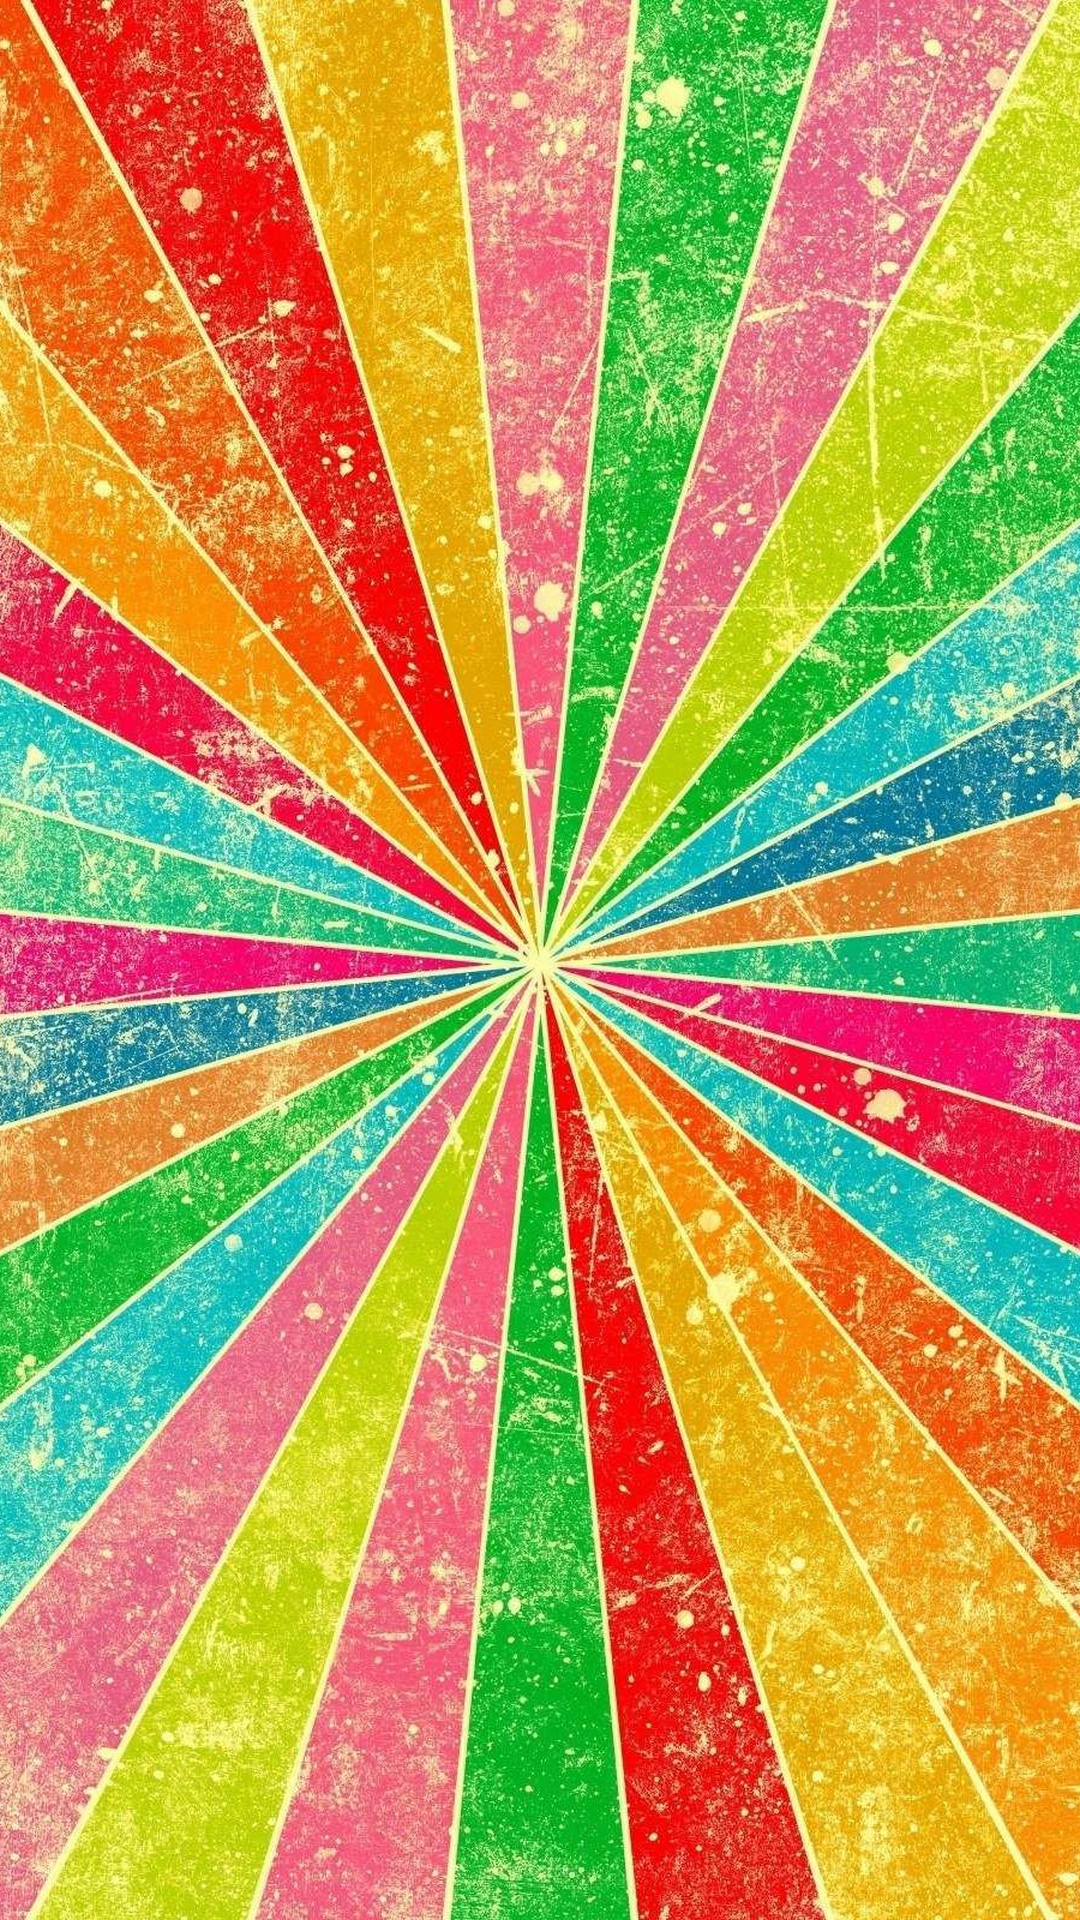 Rainbow Colors Wallpaper Android with image resolution 1080x1920 pixel. You can make this wallpaper for your Android backgrounds, Tablet, Smartphones Screensavers and Mobile Phone Lock Screen